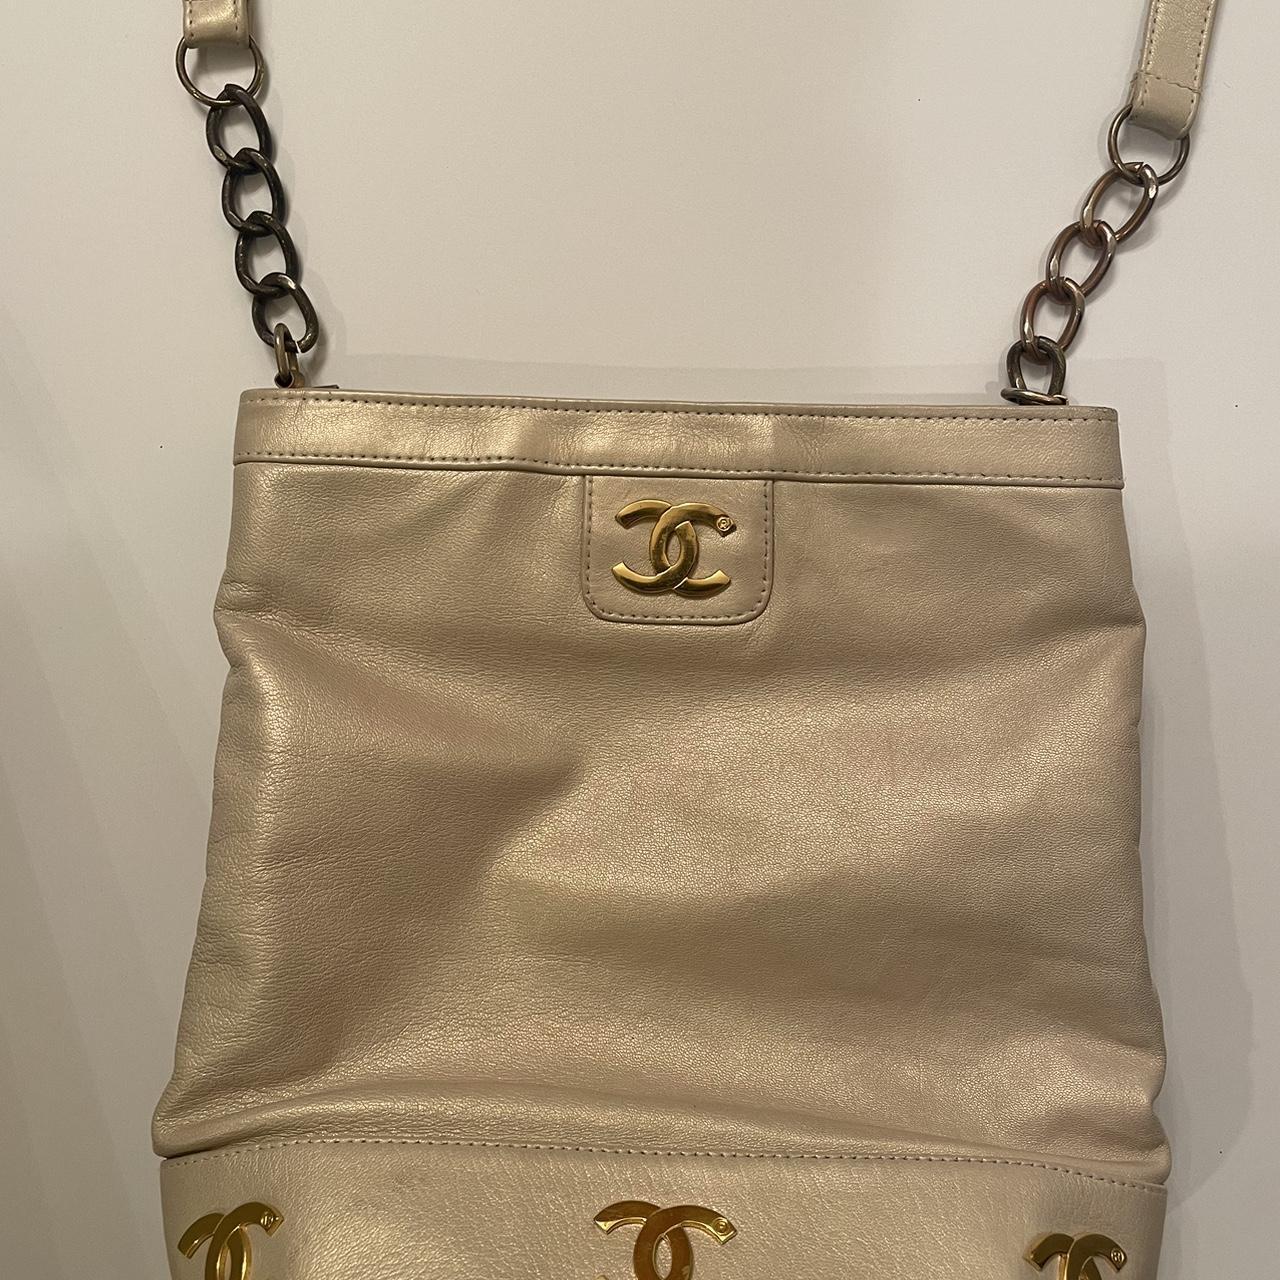 Vintage Authentic Chanel Purse Used Like New Condition - Depop